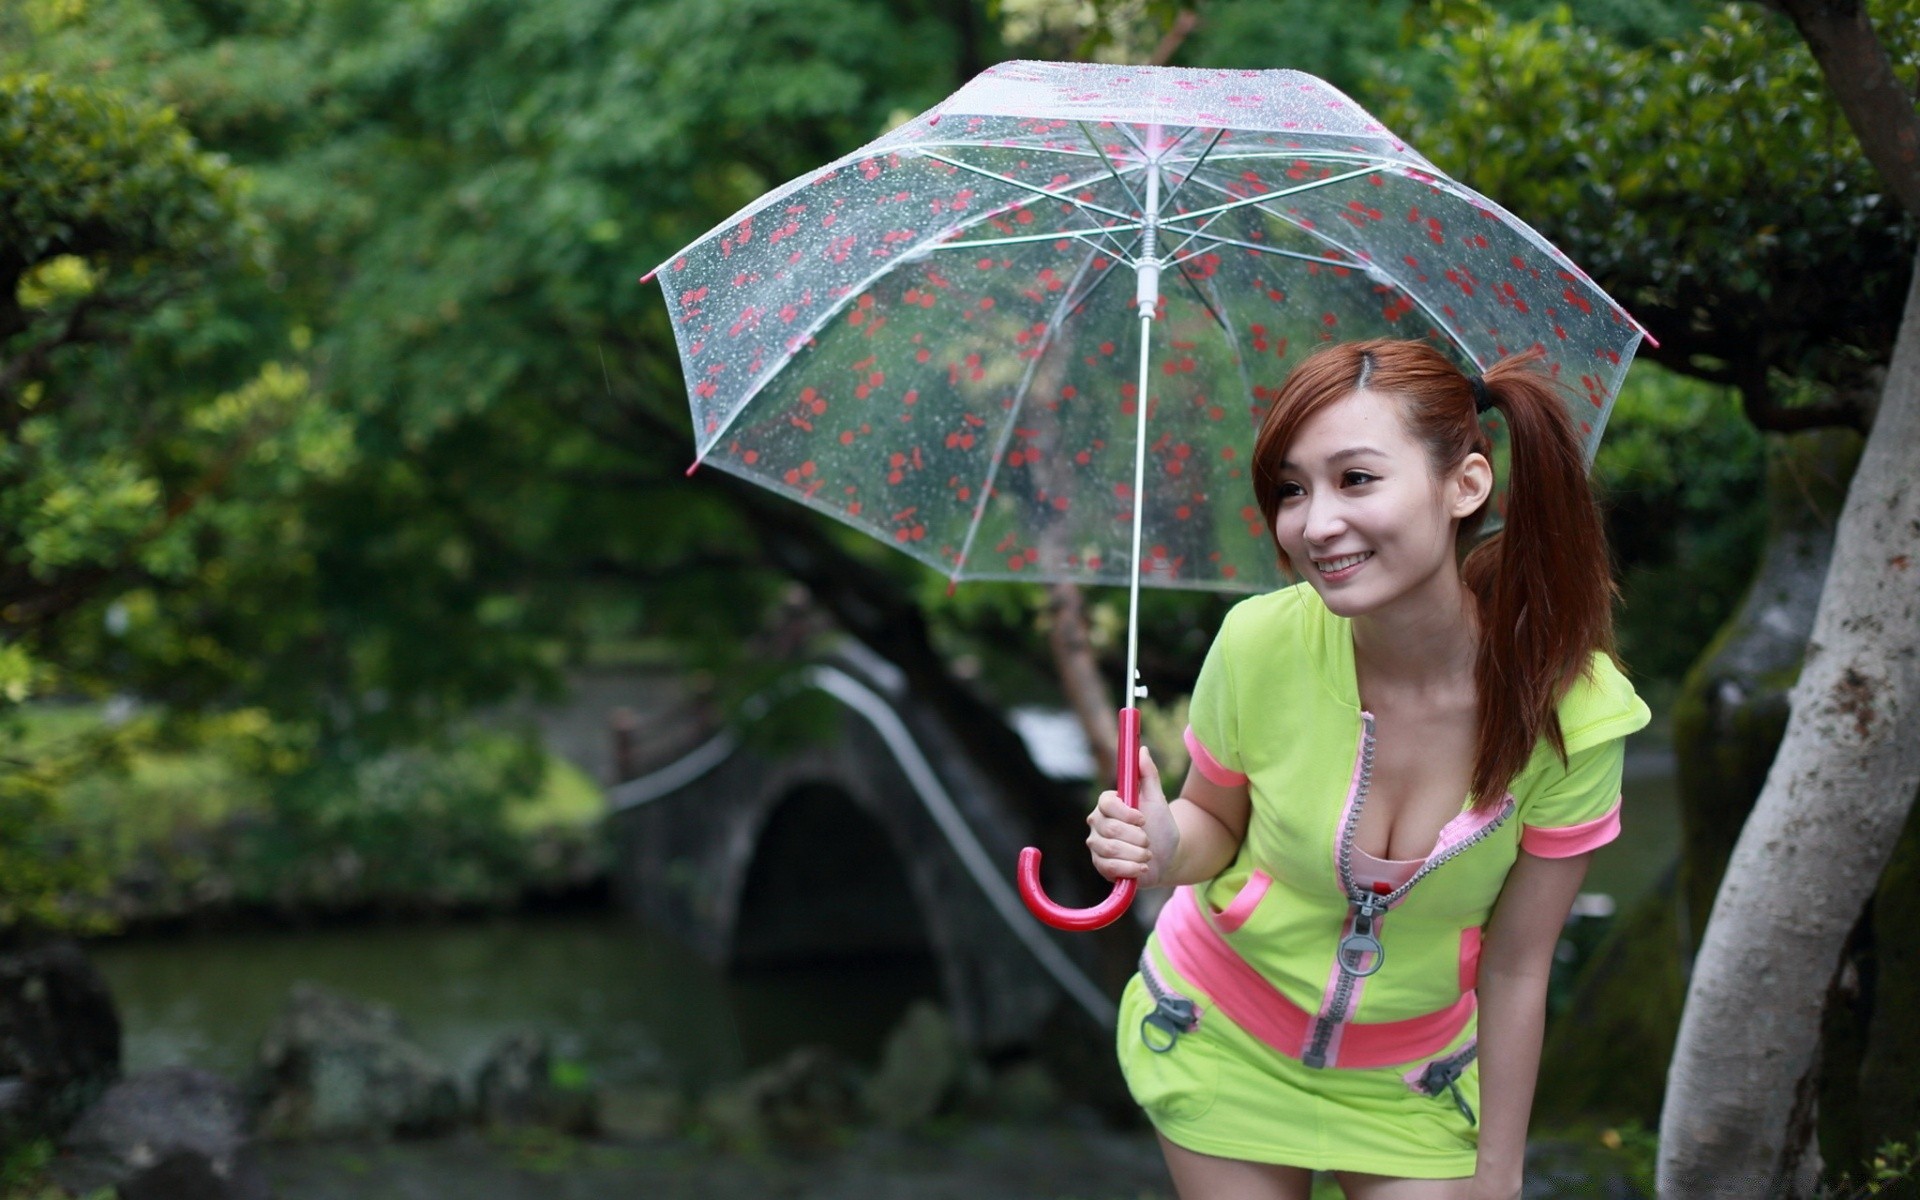 the other girls umbrella rain nature park outdoors summer beautiful girl child leisure grass woman outside young fun fall pretty lifestyle